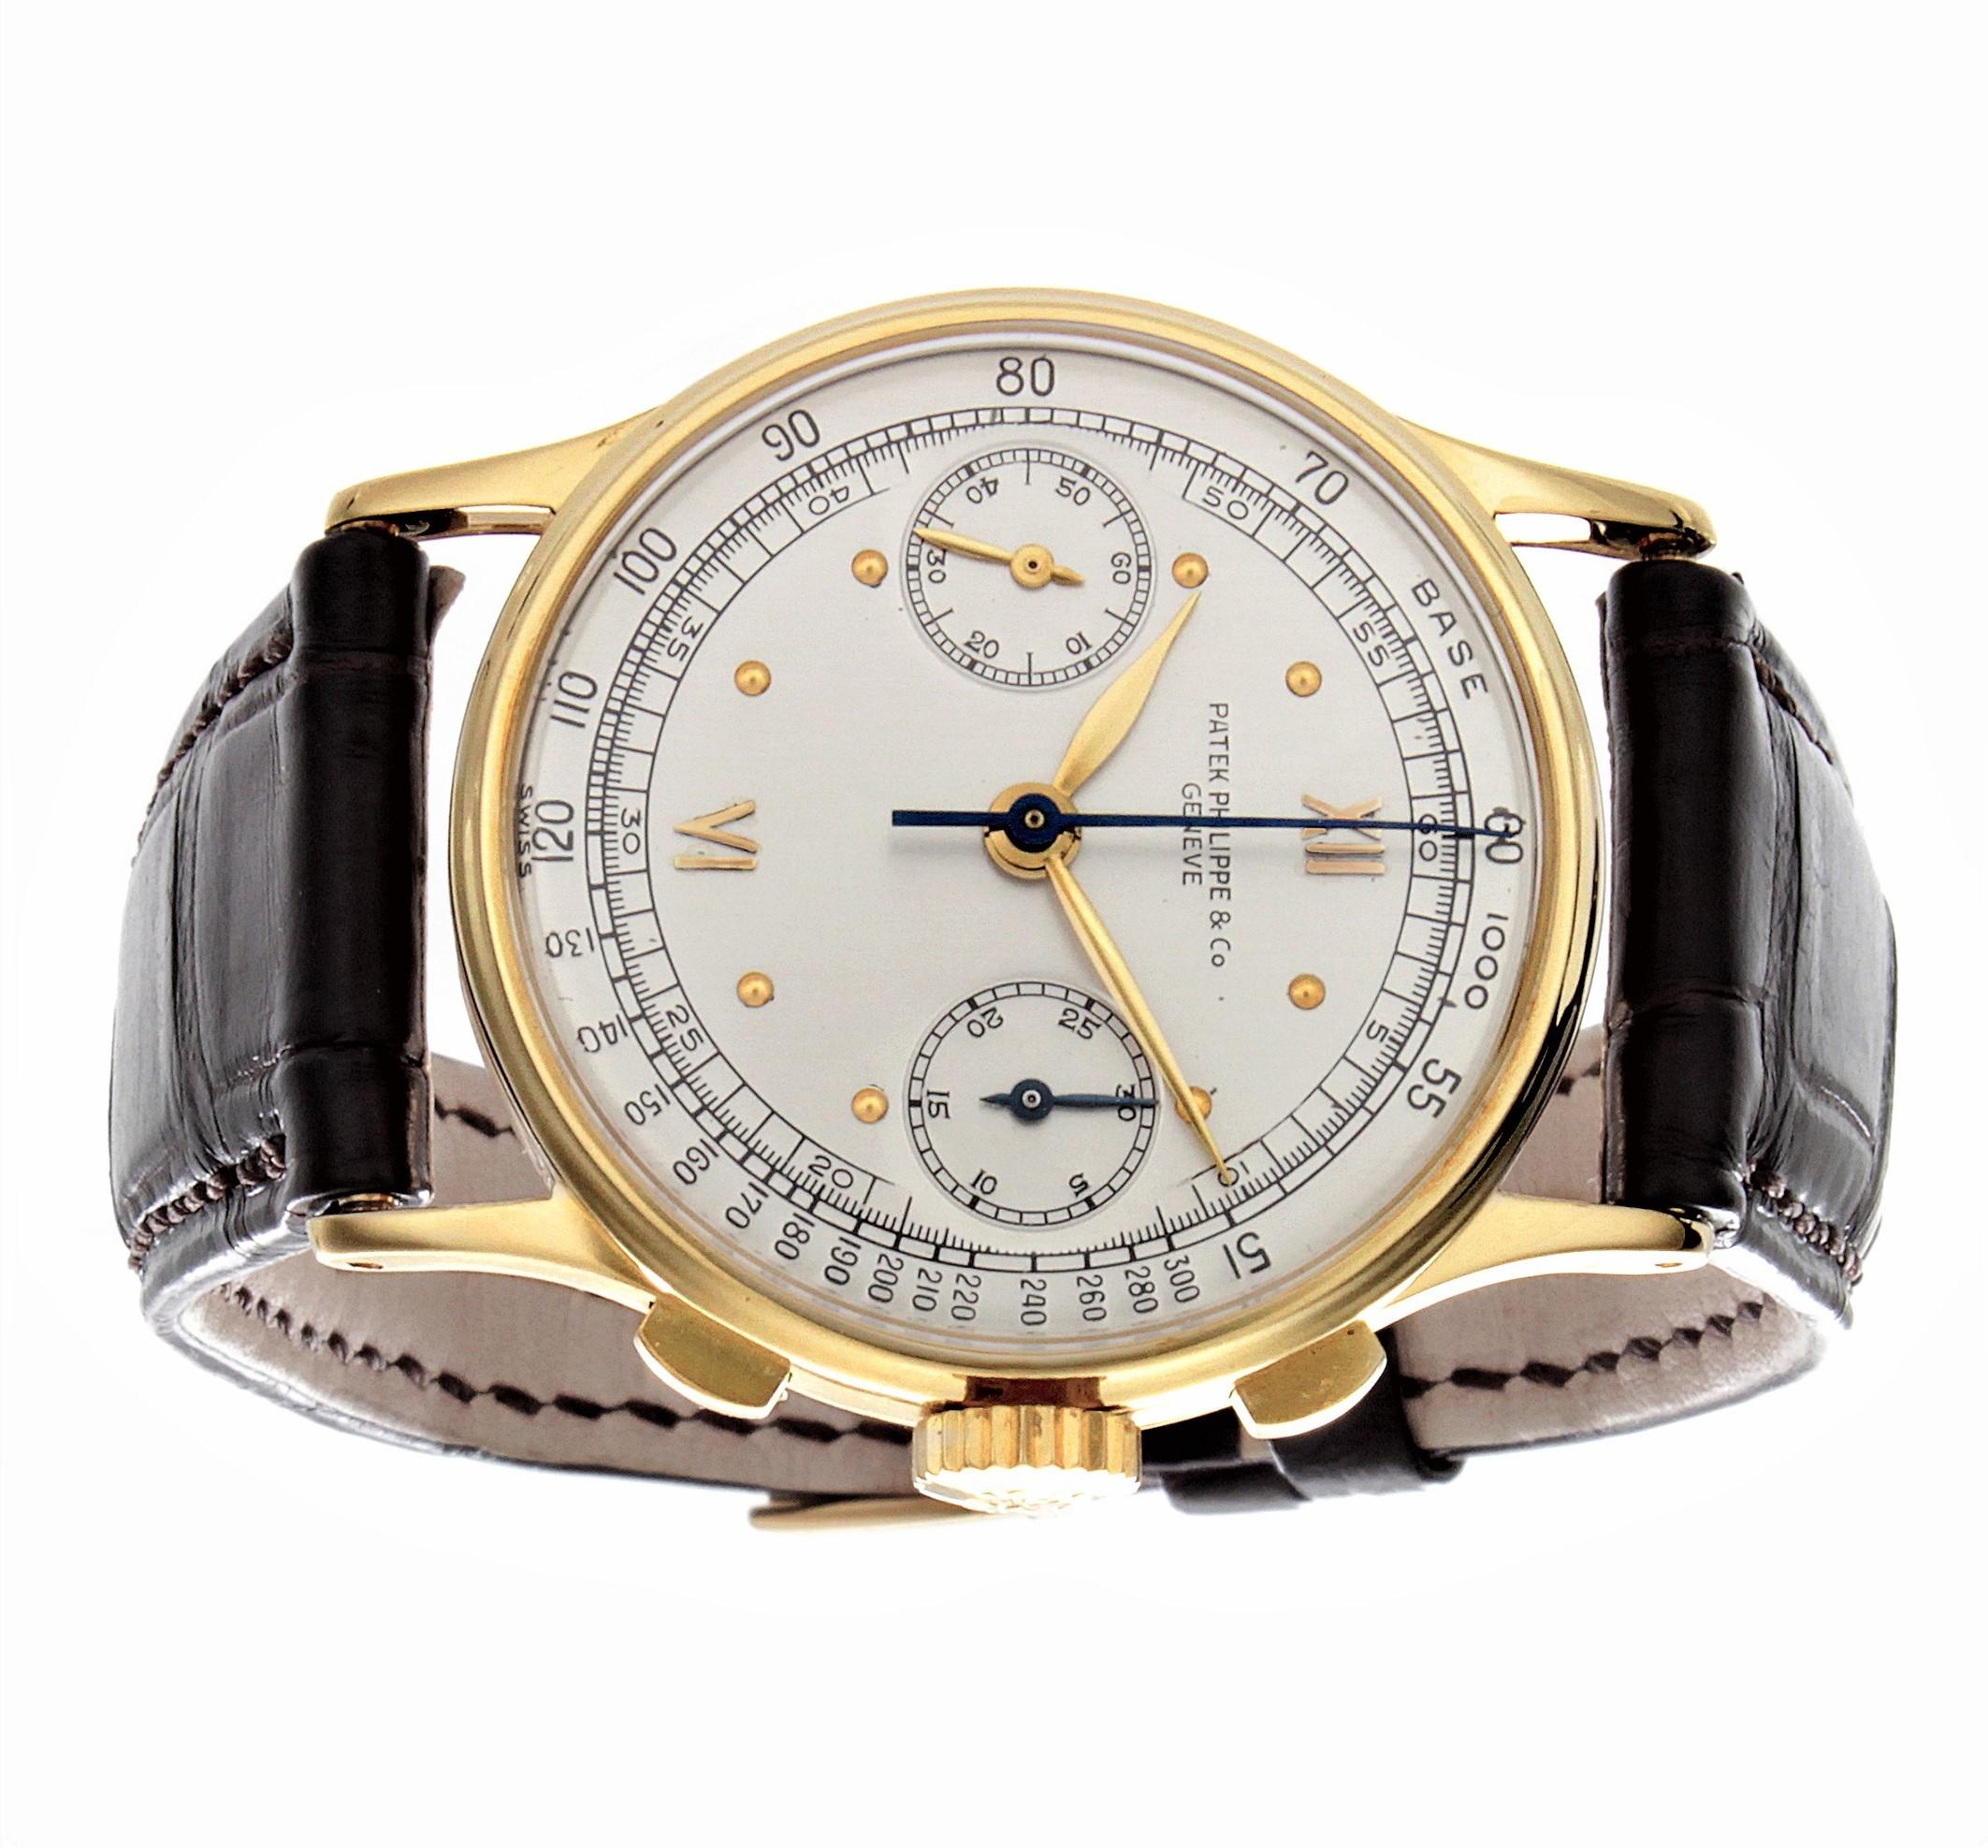 Introduction:

Patek Philippe 130J Vintage Chronograph is made in 18K  yellow gold, and measures 33.5 mm.  The watch was made in 1940, and is fitted  with a 13